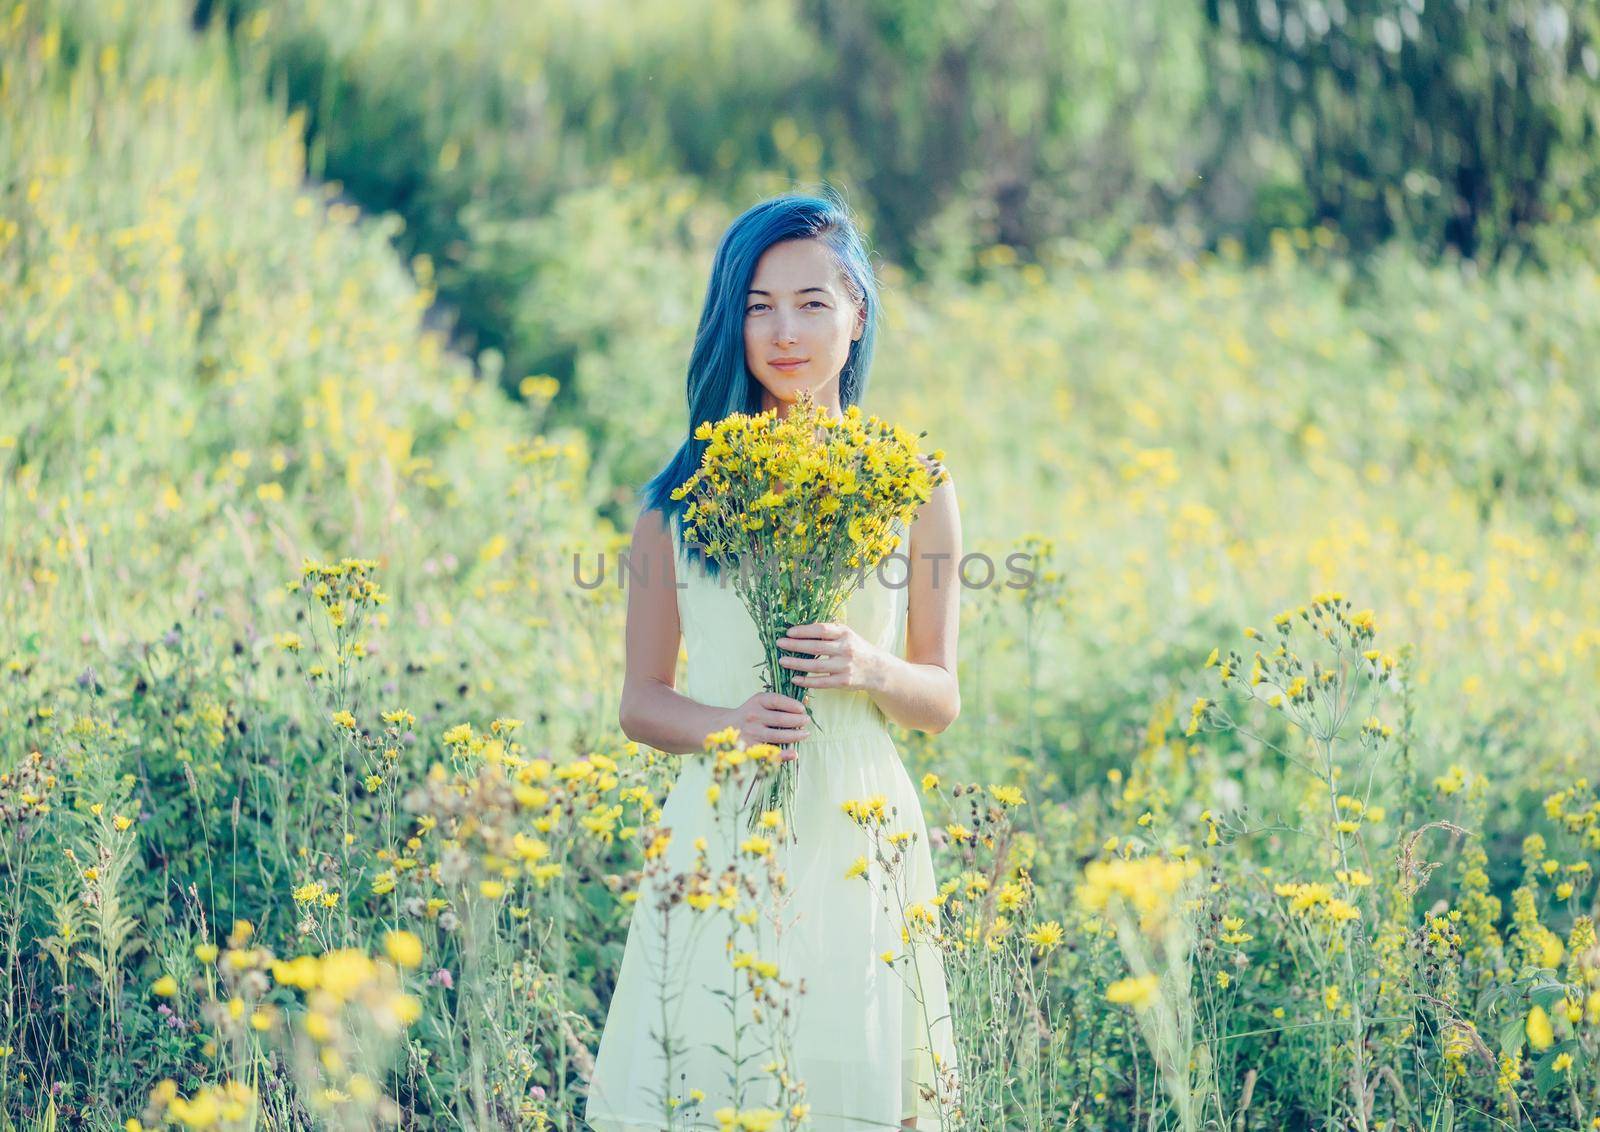 Smiling young woman with blue hair and a bouquet of yellow flowers standing in a field